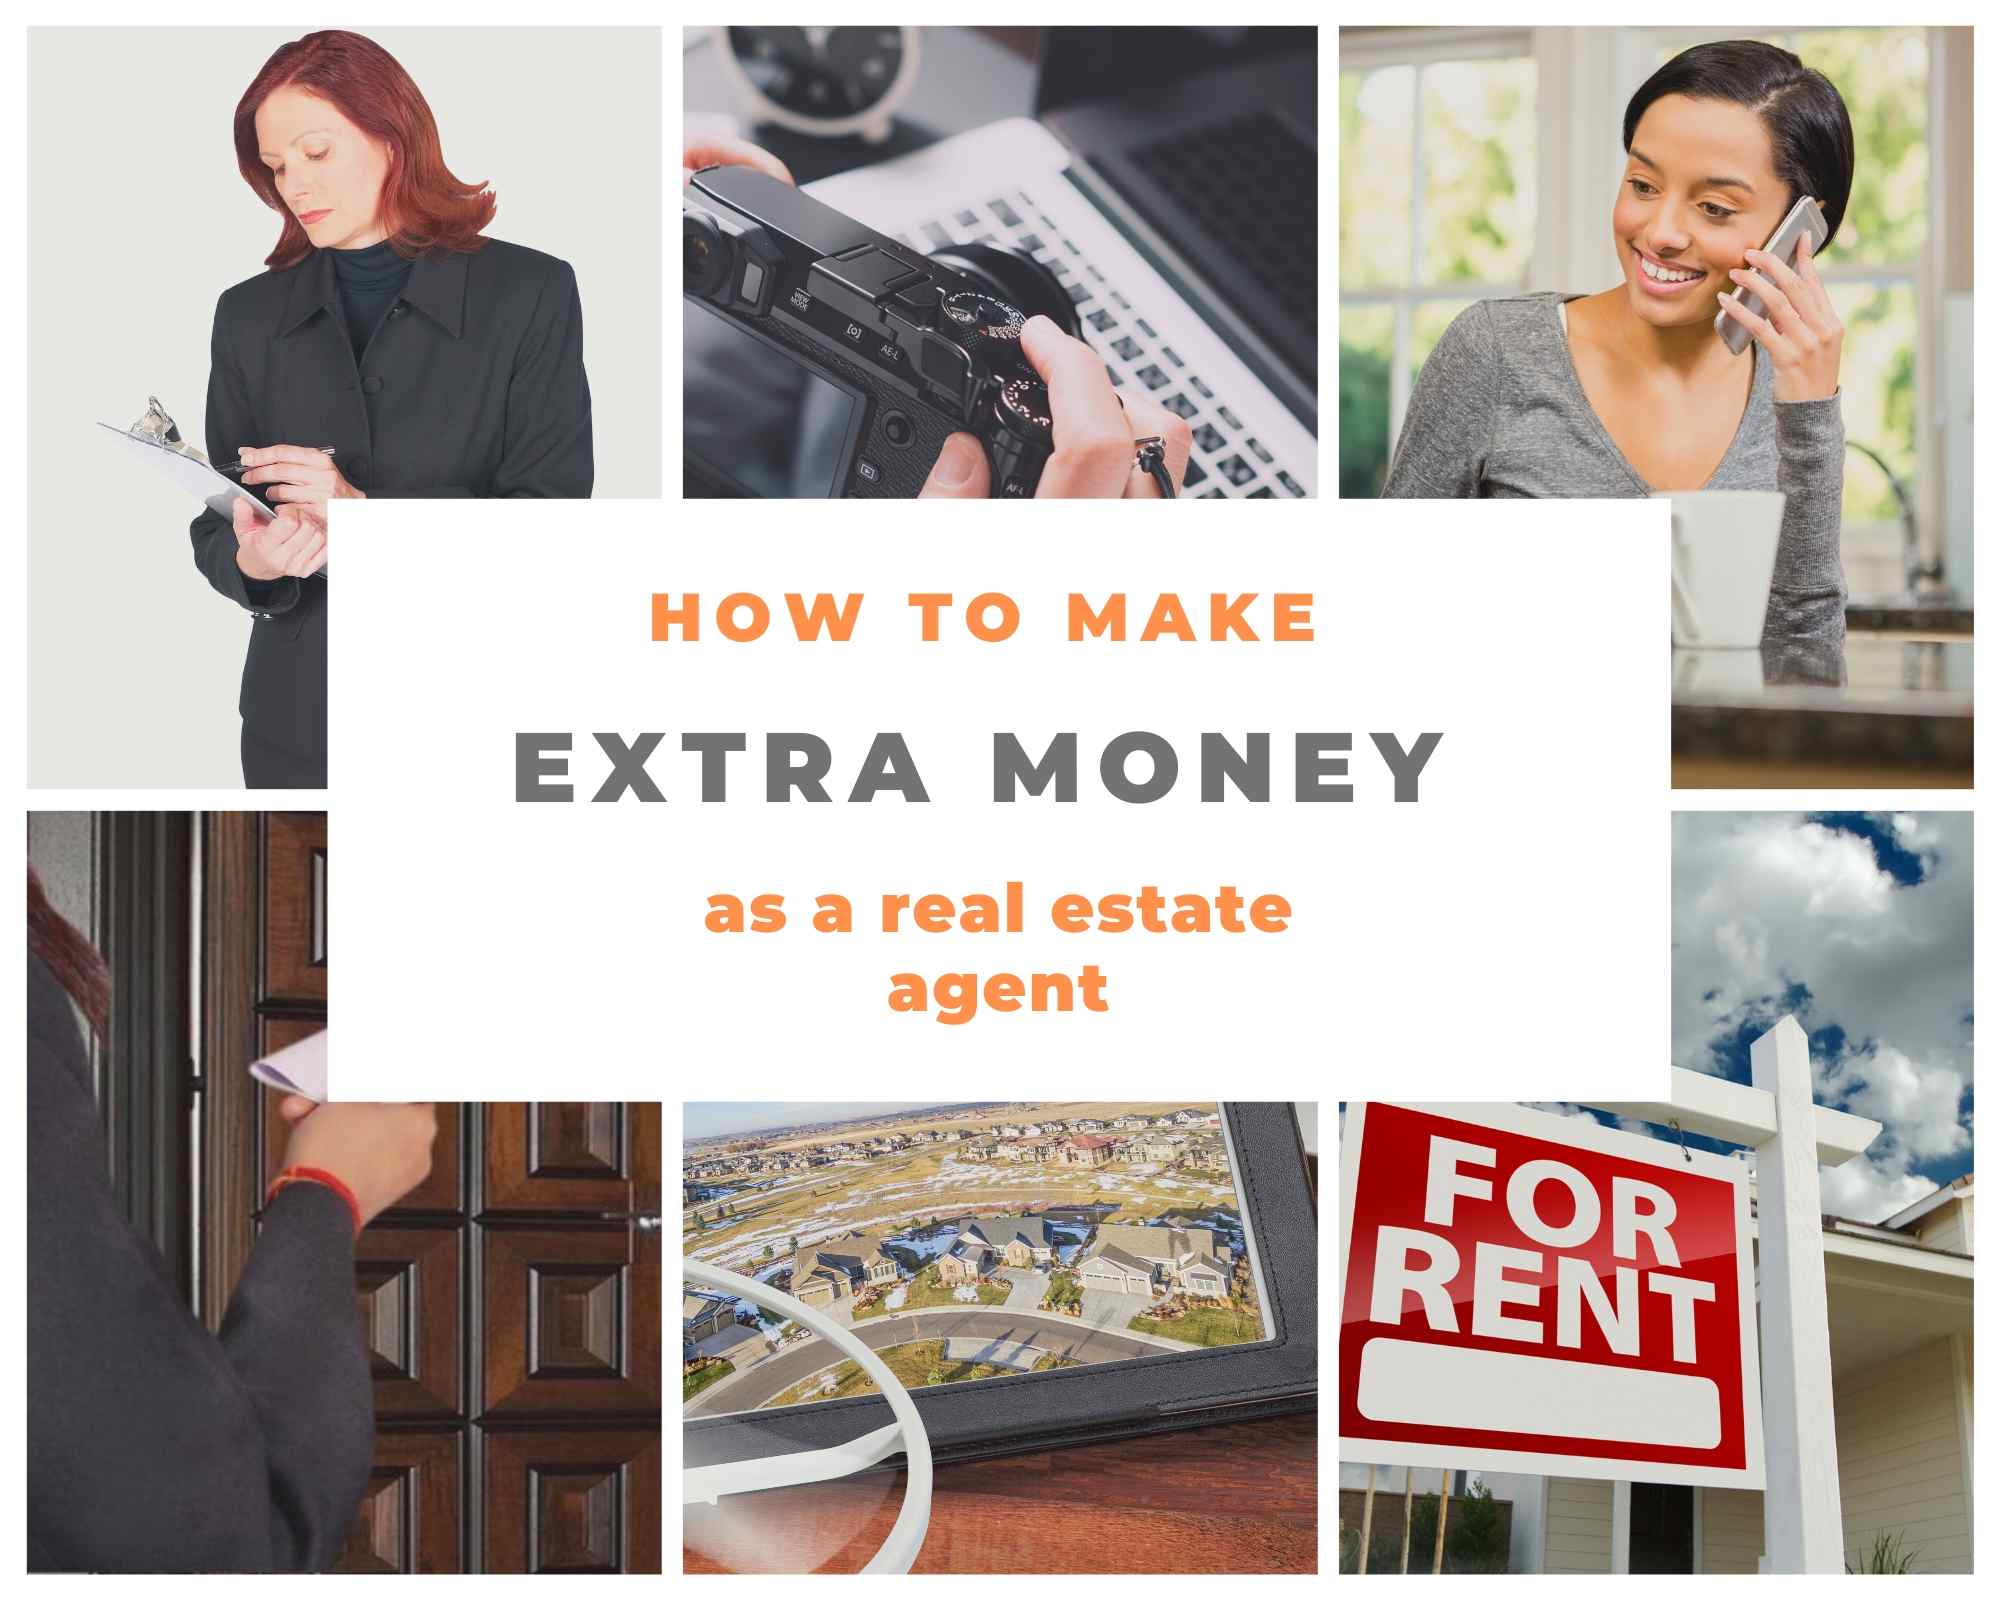 Supplemental Income for Real Estate Agents